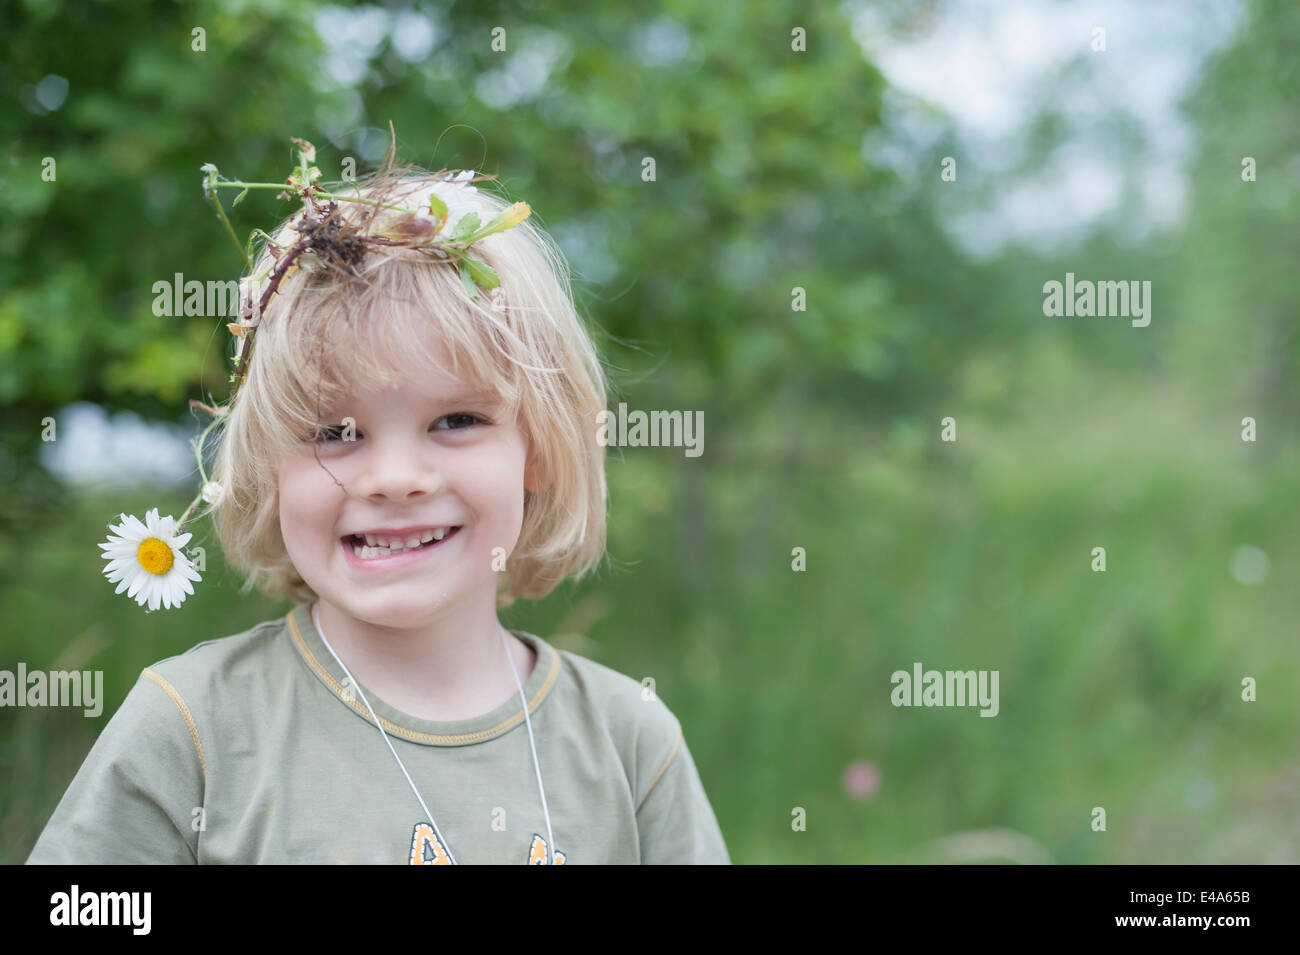 Germany, Saxony, Boy wearing flowers with marguerite Stock Photo